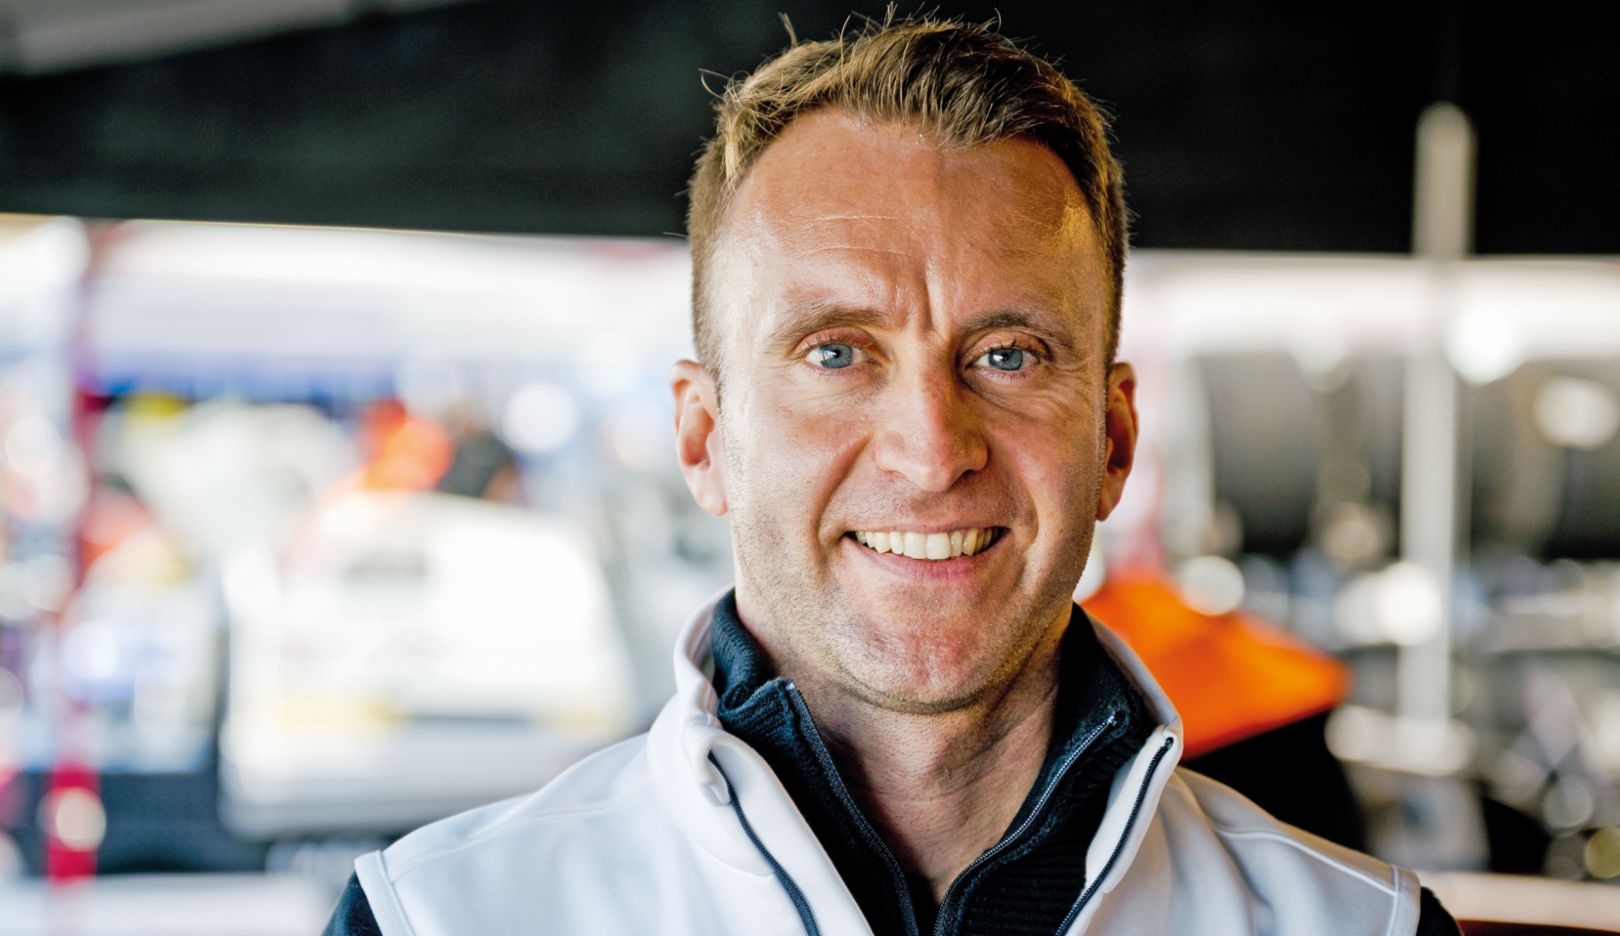 “We all share a passion for Porsche, be it as a current or former driver, a brand ambassador, a fan, or an owner of rare race cars.” Timo Bernhard